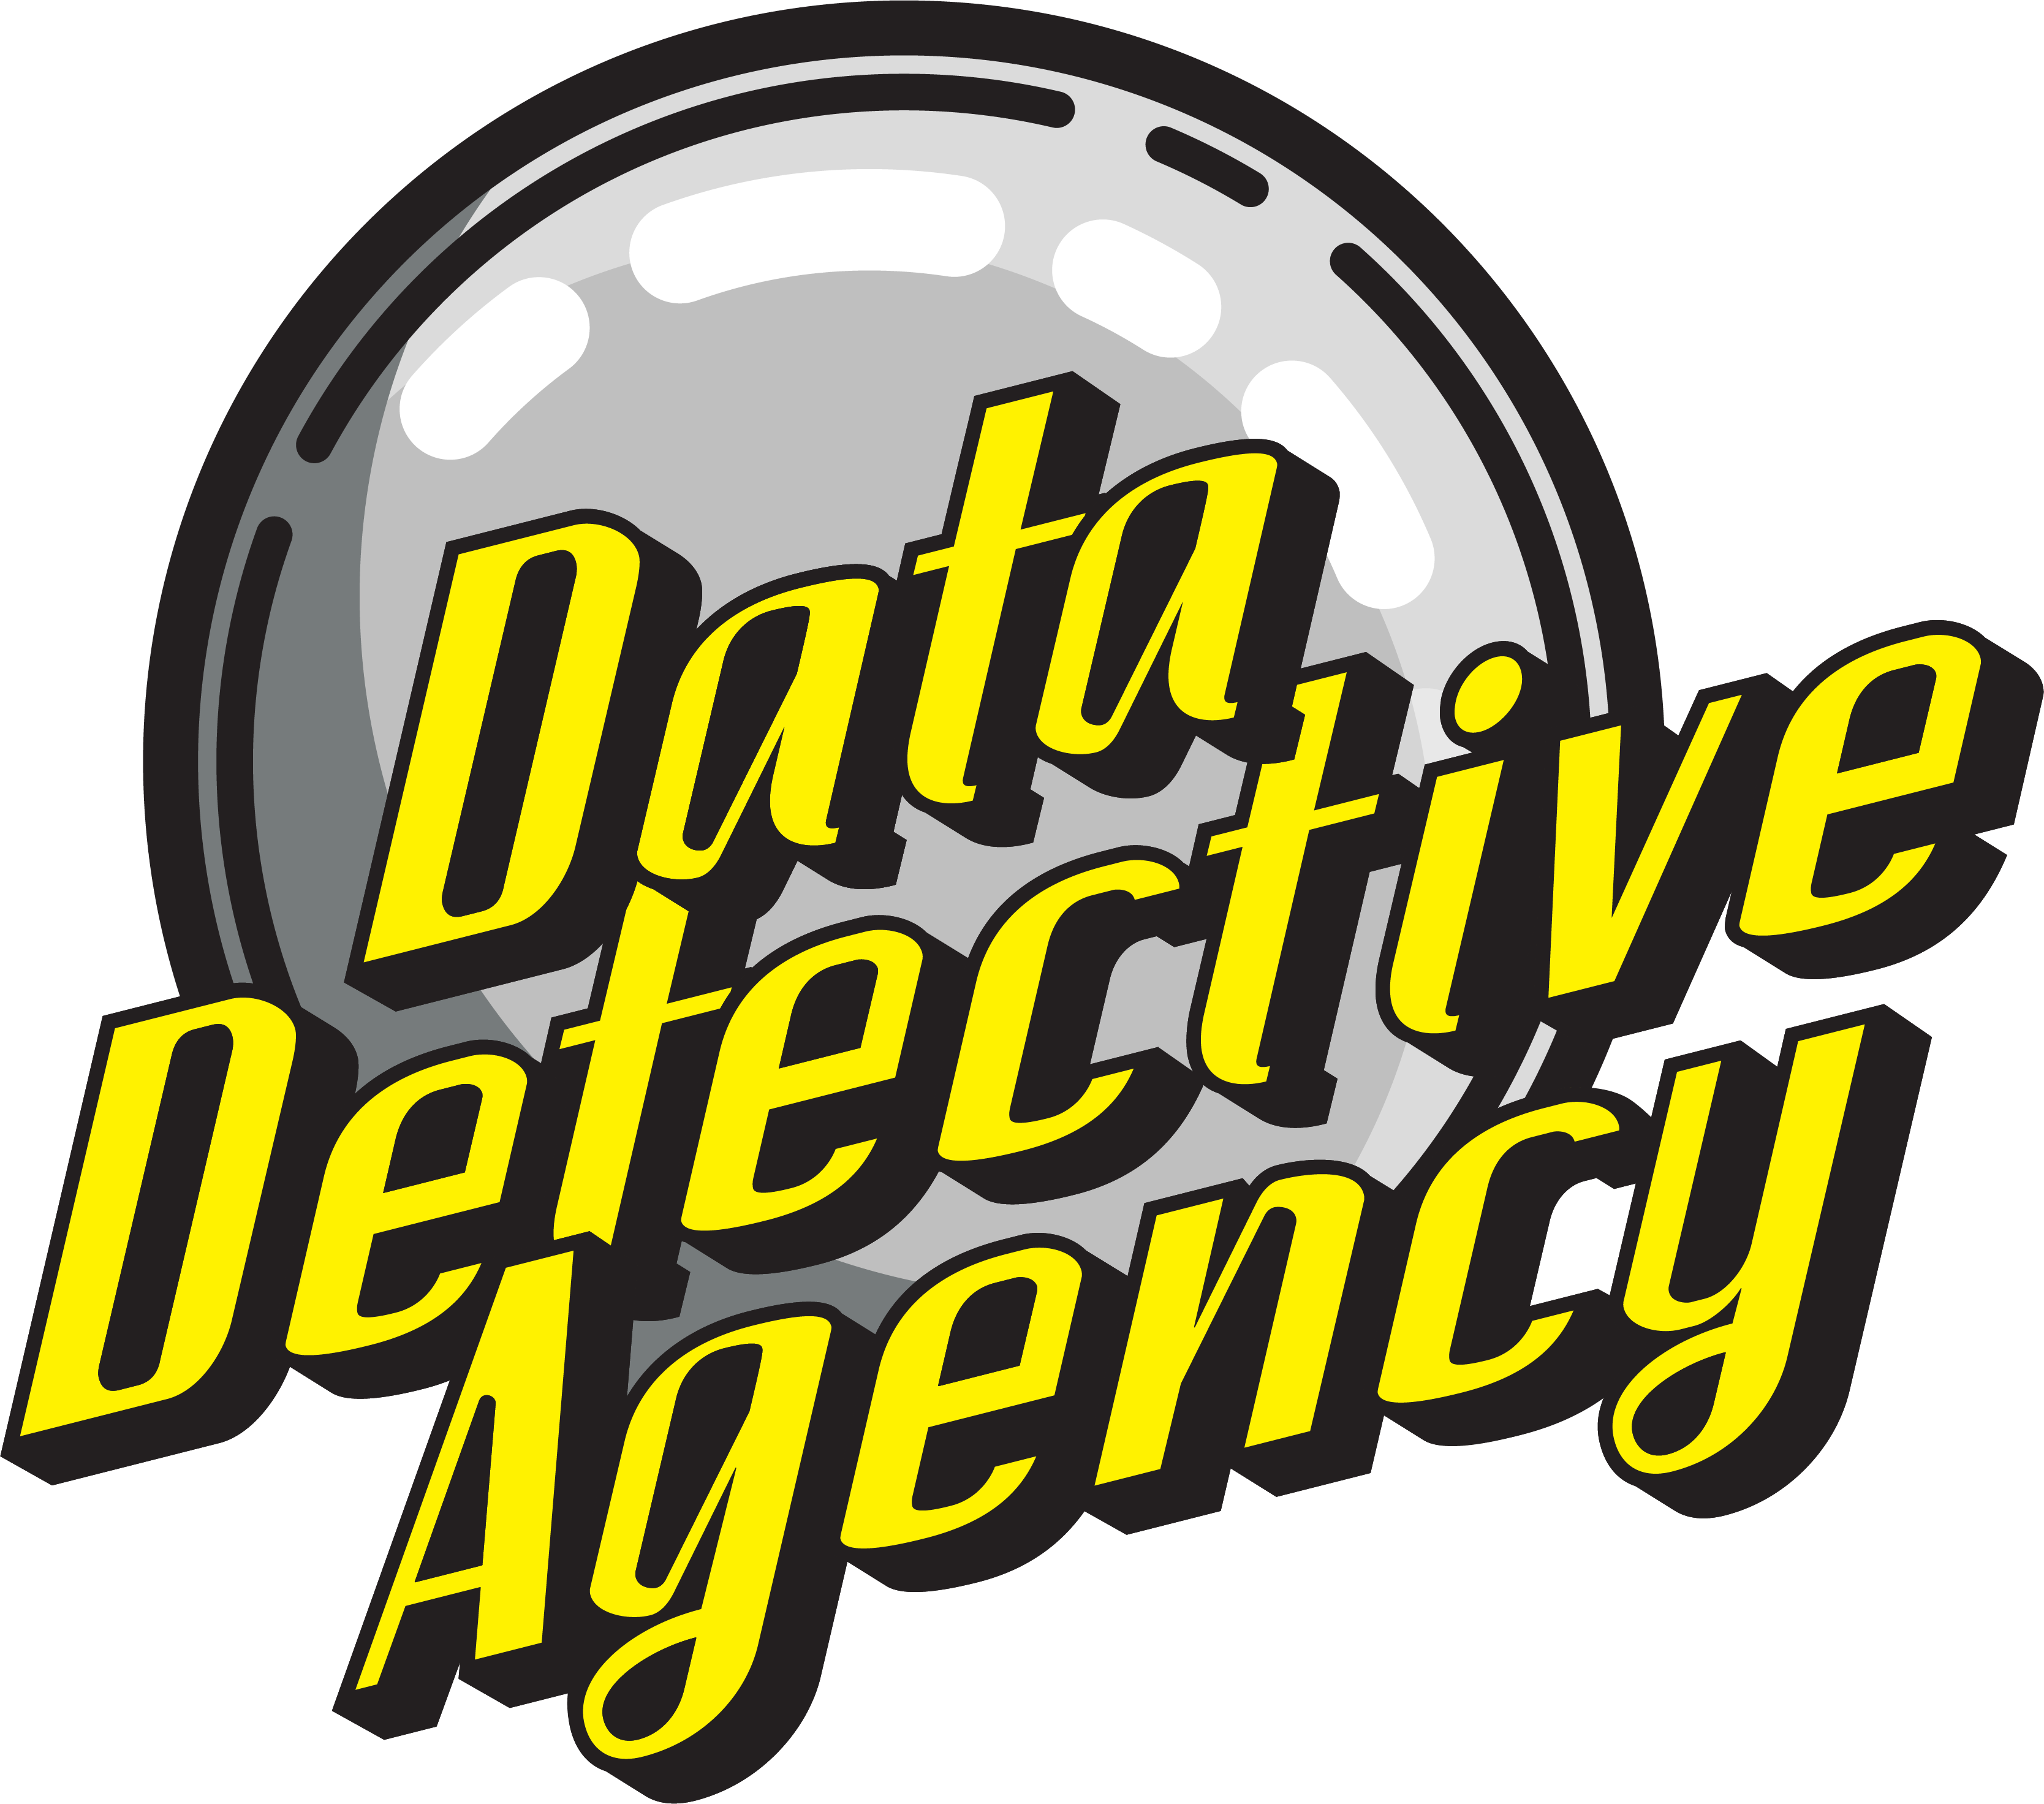 Download Data Detective Agency Logo | Wallpapers.com